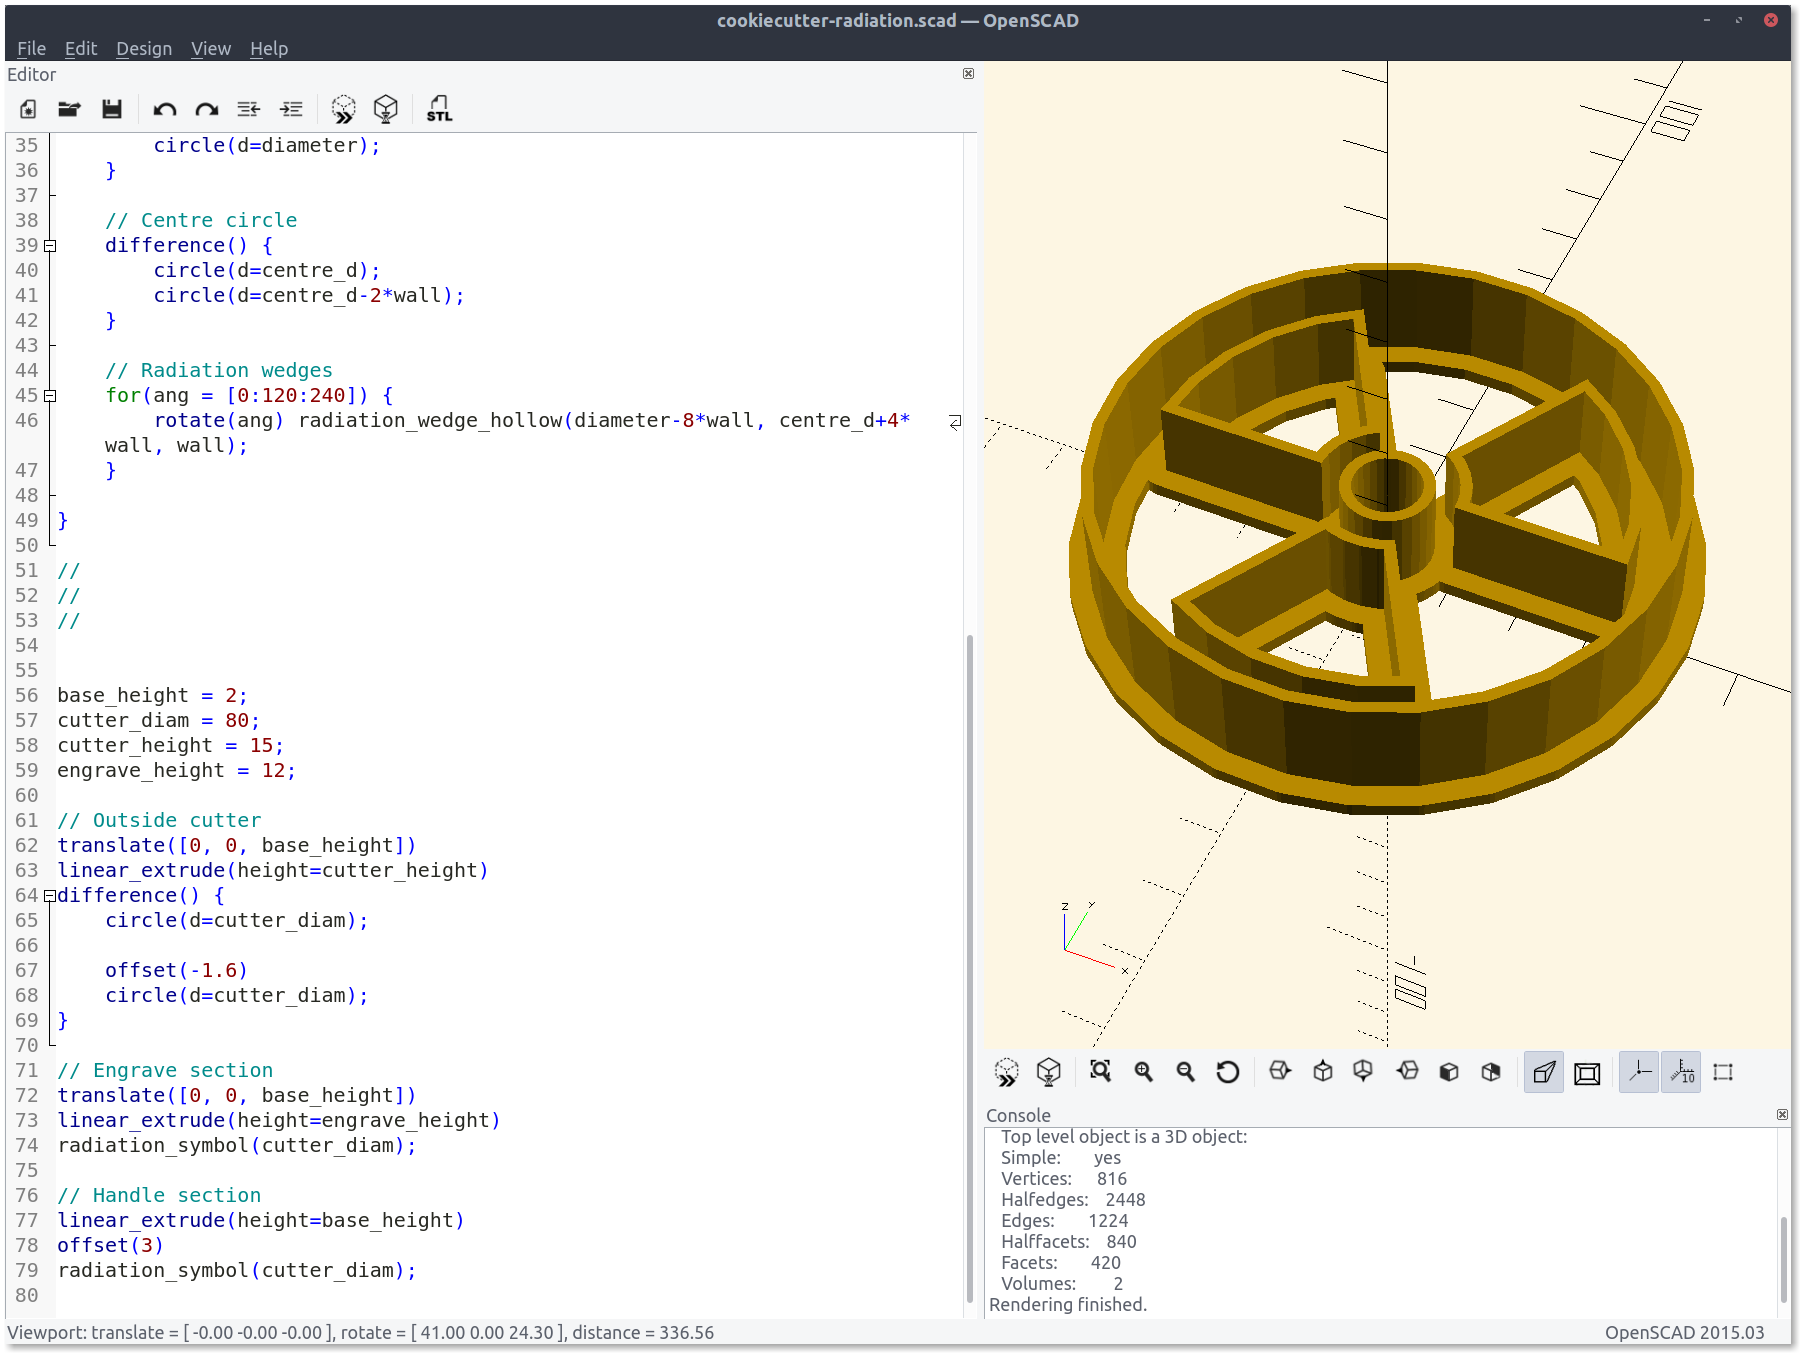 OpenSCAD interface, showing a render of the radiation symbol cookie cutter and part of the code that generates it